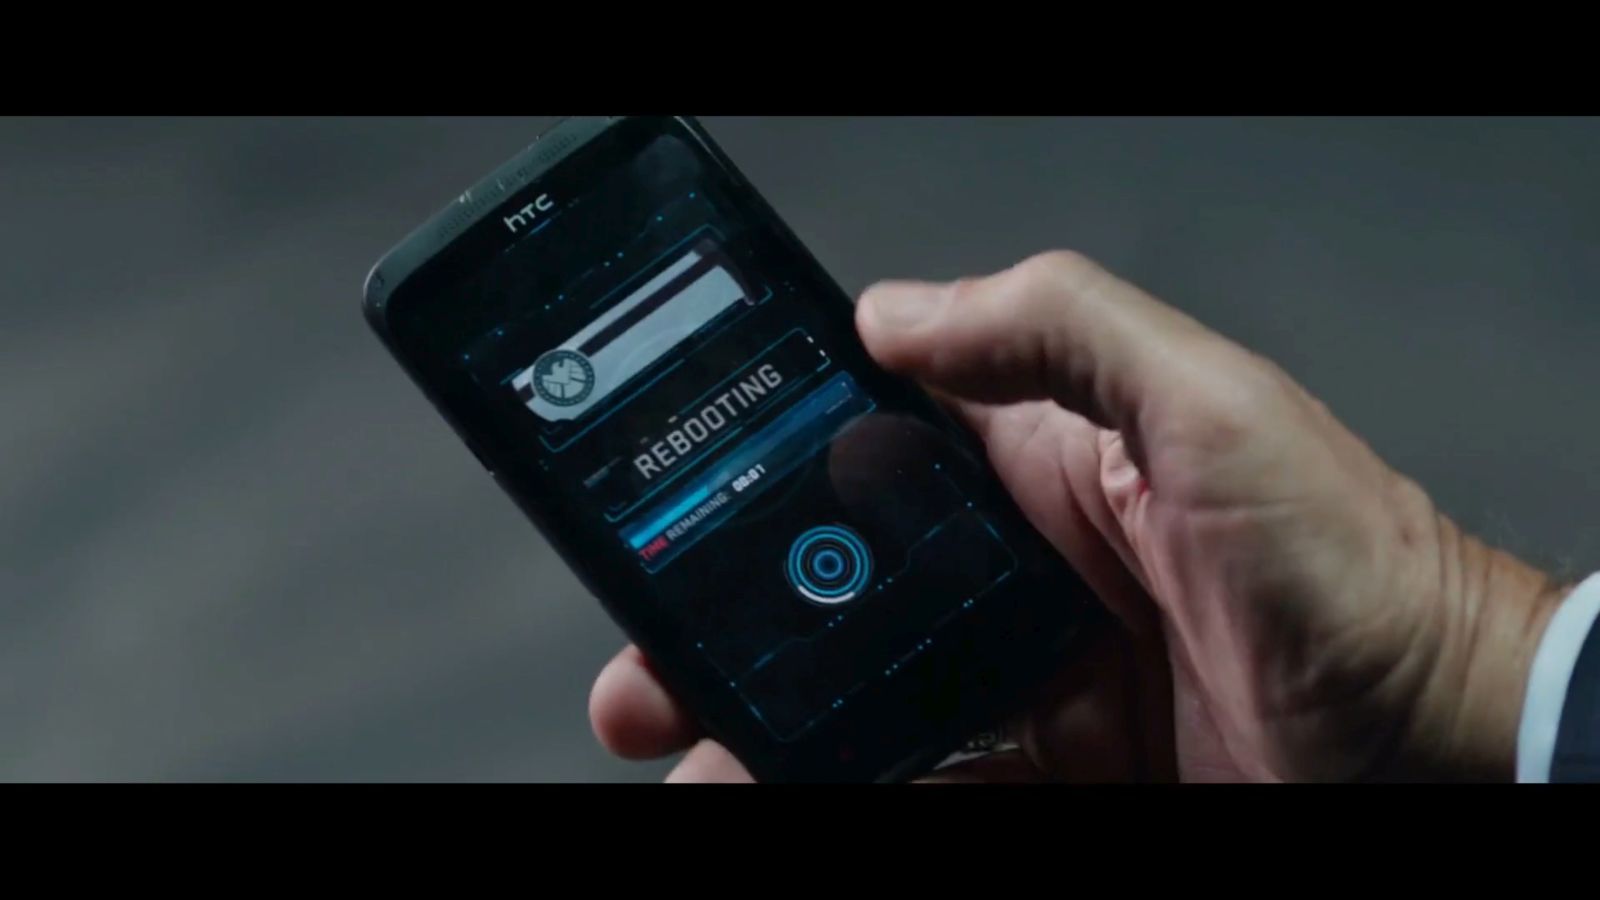 Captain America The Winter Soldier (2014) – HTC One X+